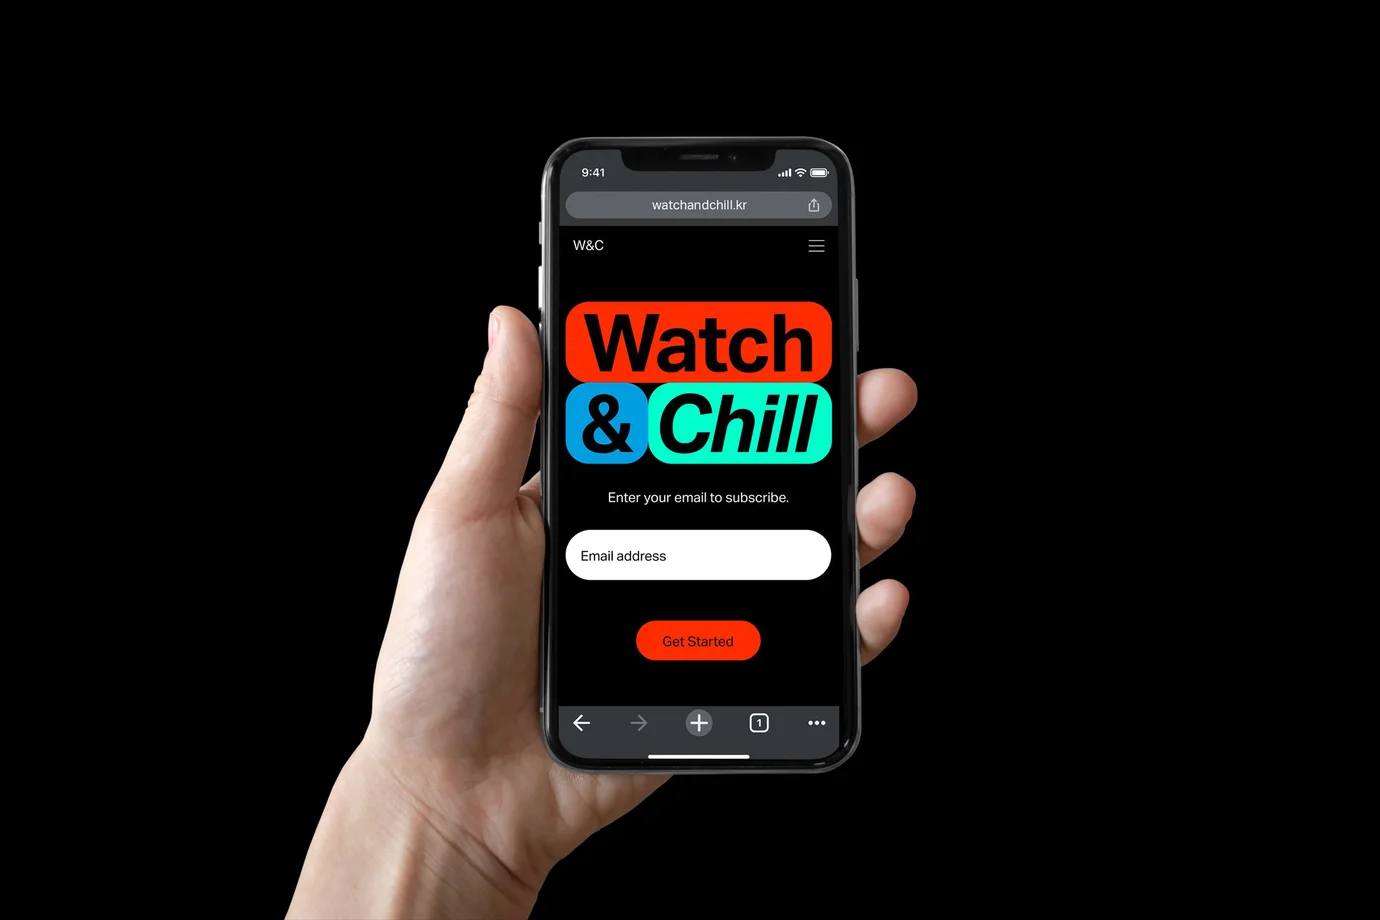 M+ museum watch and chill programme, image courtesy of MMCA.